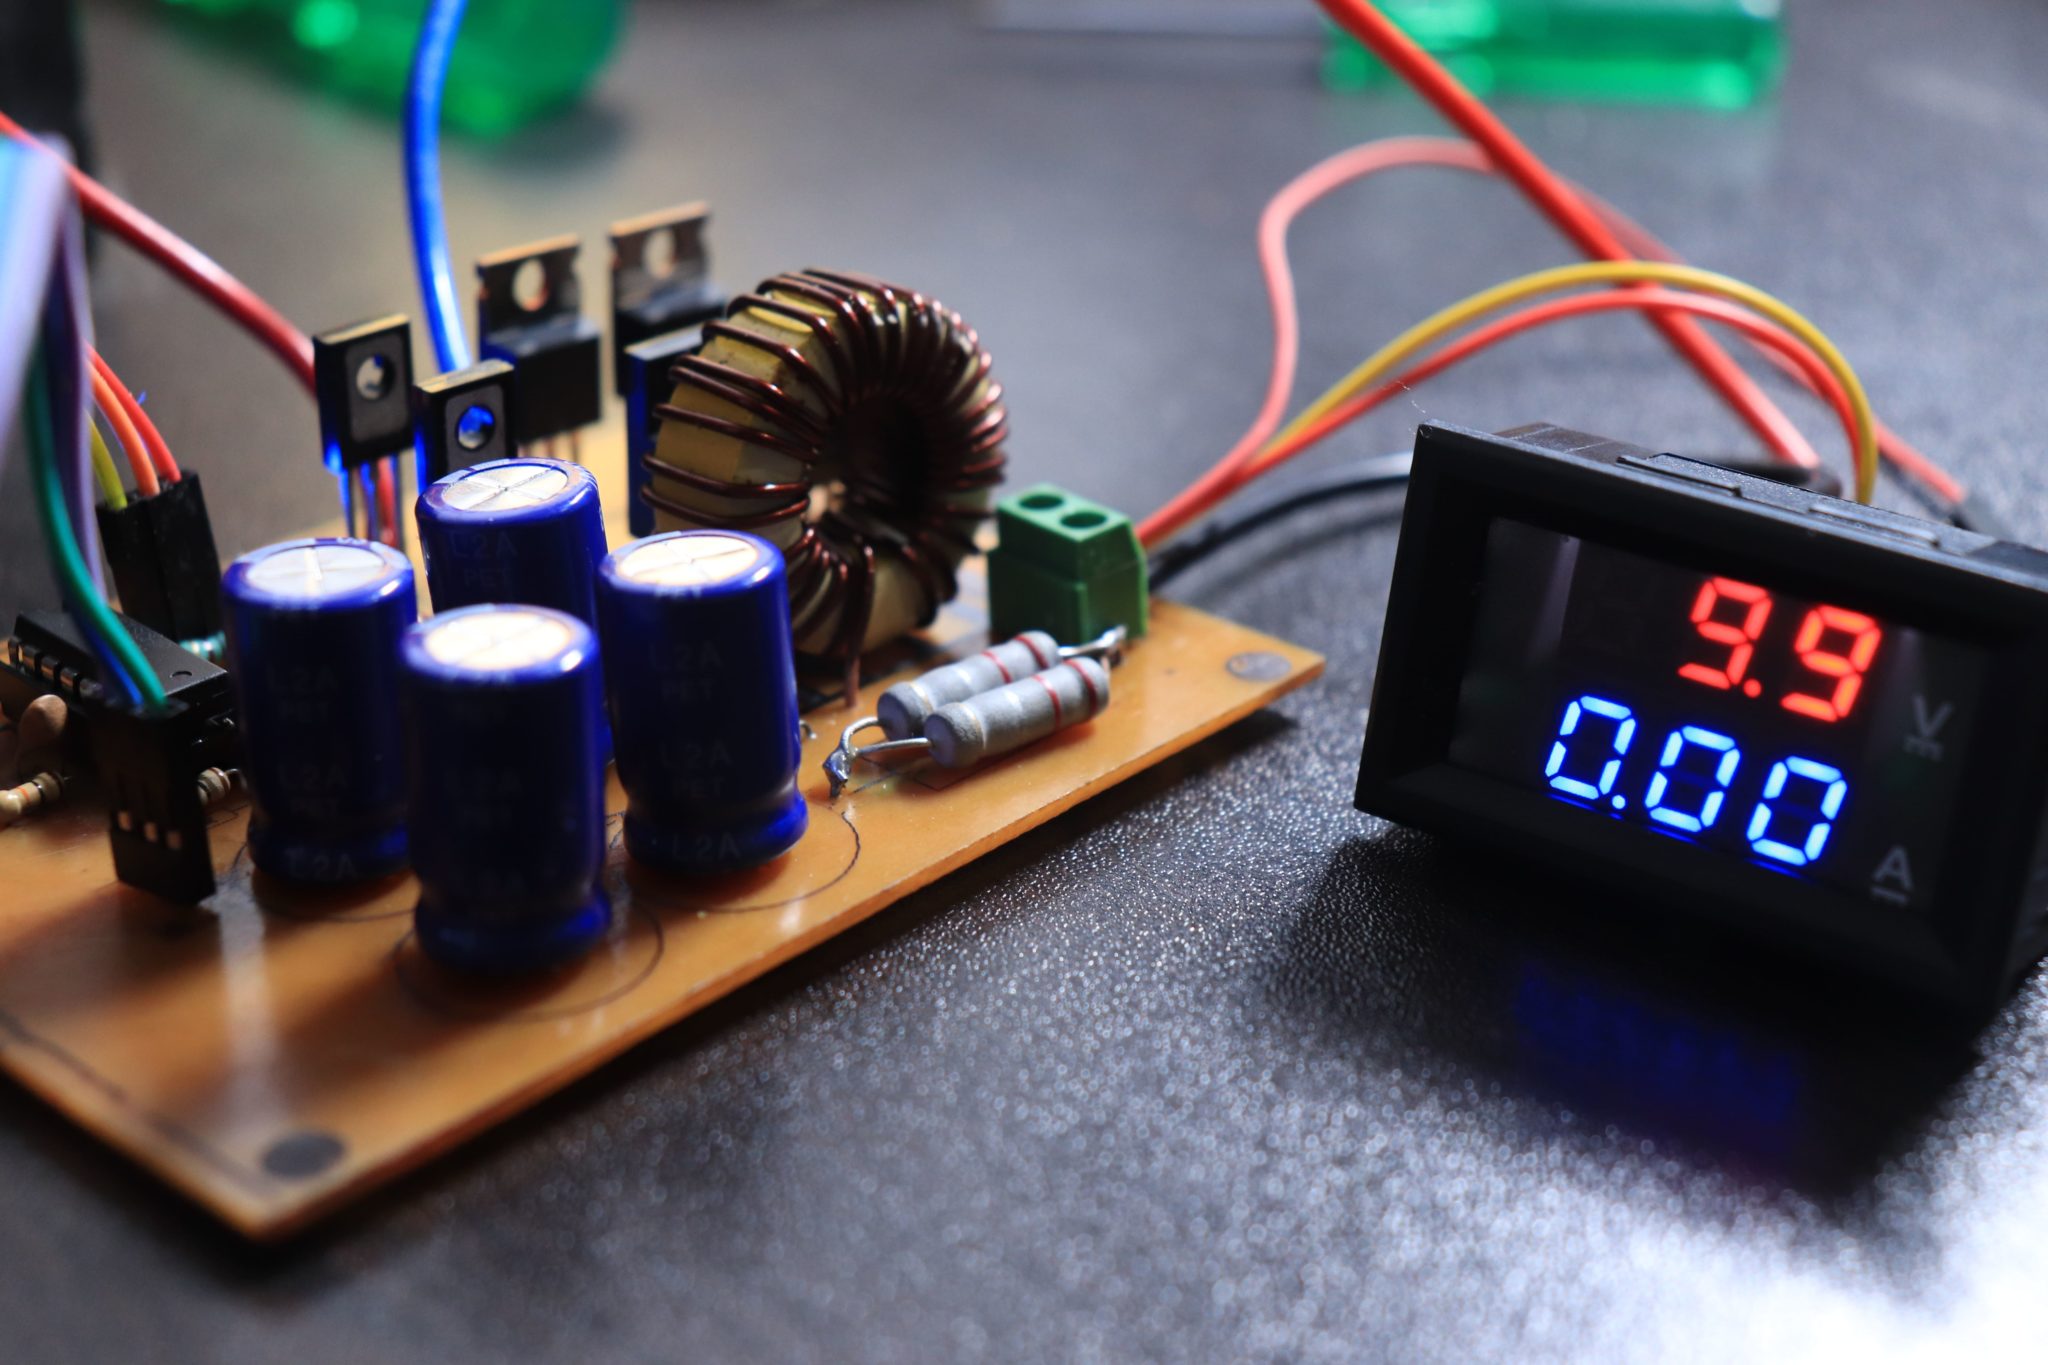 DIY Variable Power Supply With Adjustable Voltage and Current